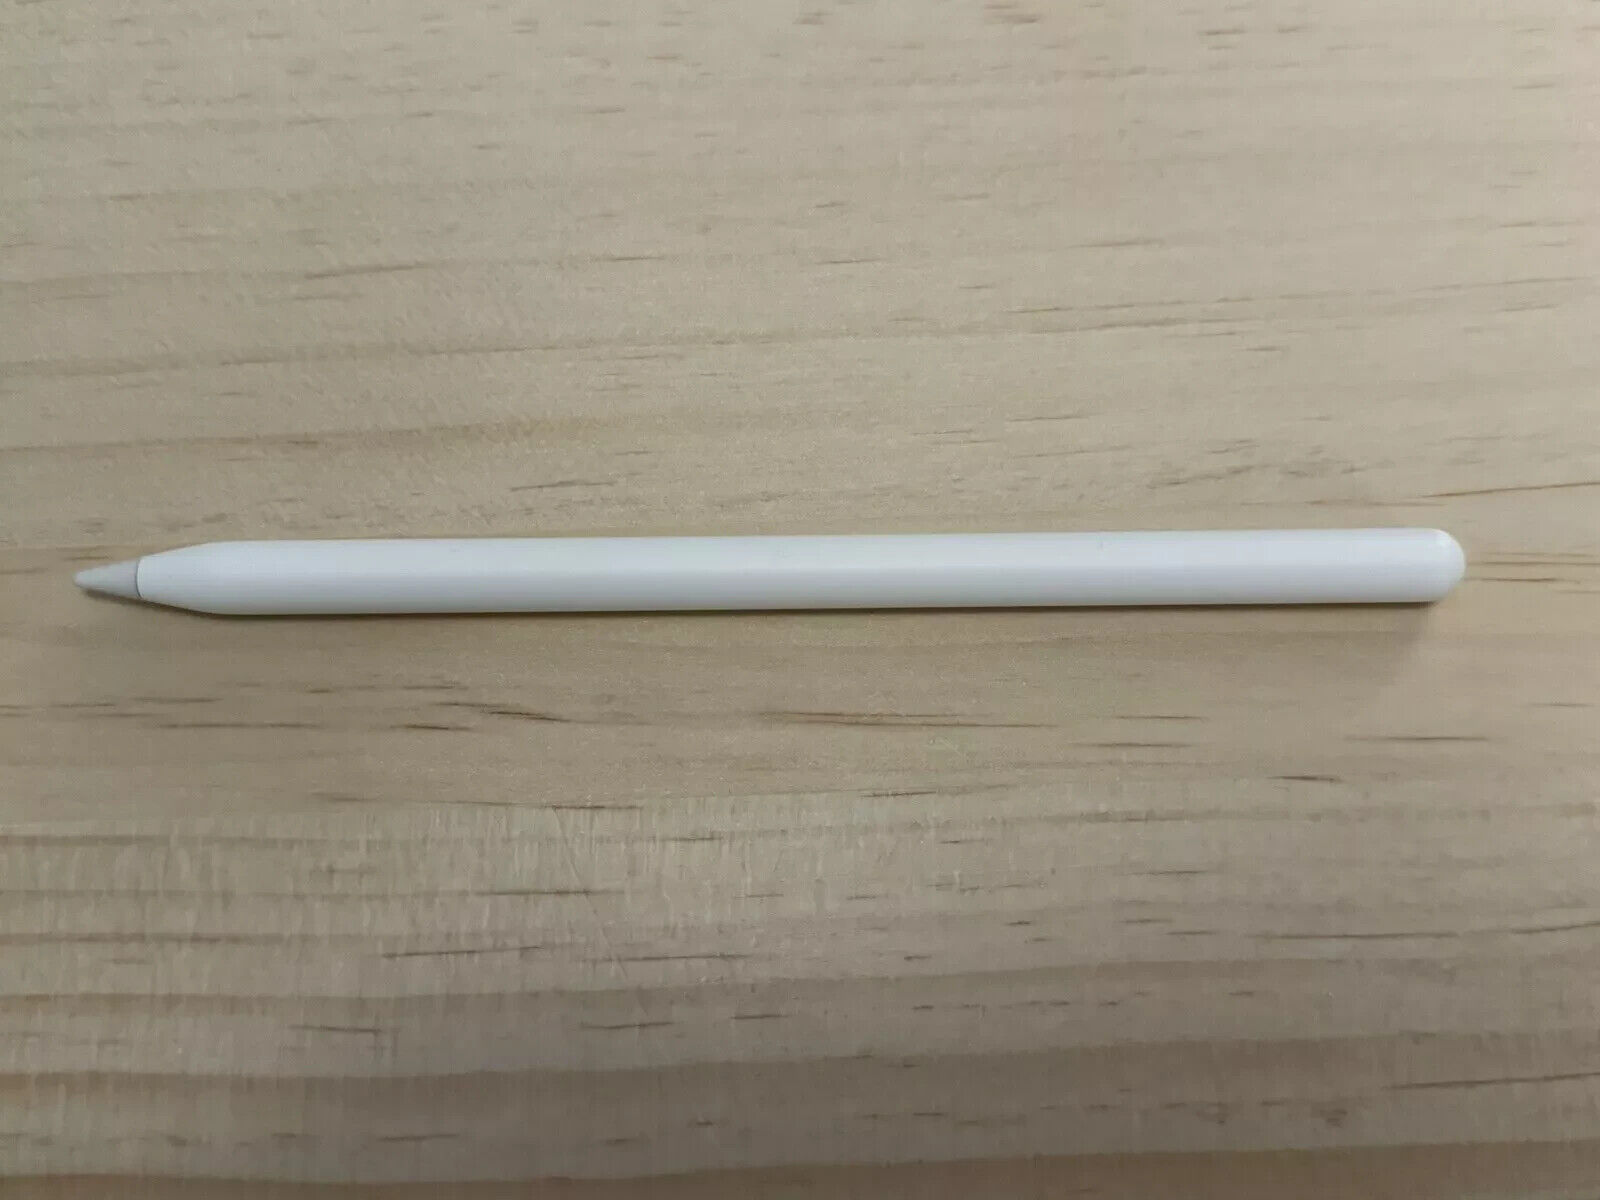 GENUINE Apple Pencil (2nd Generation) - fully functional - excellent